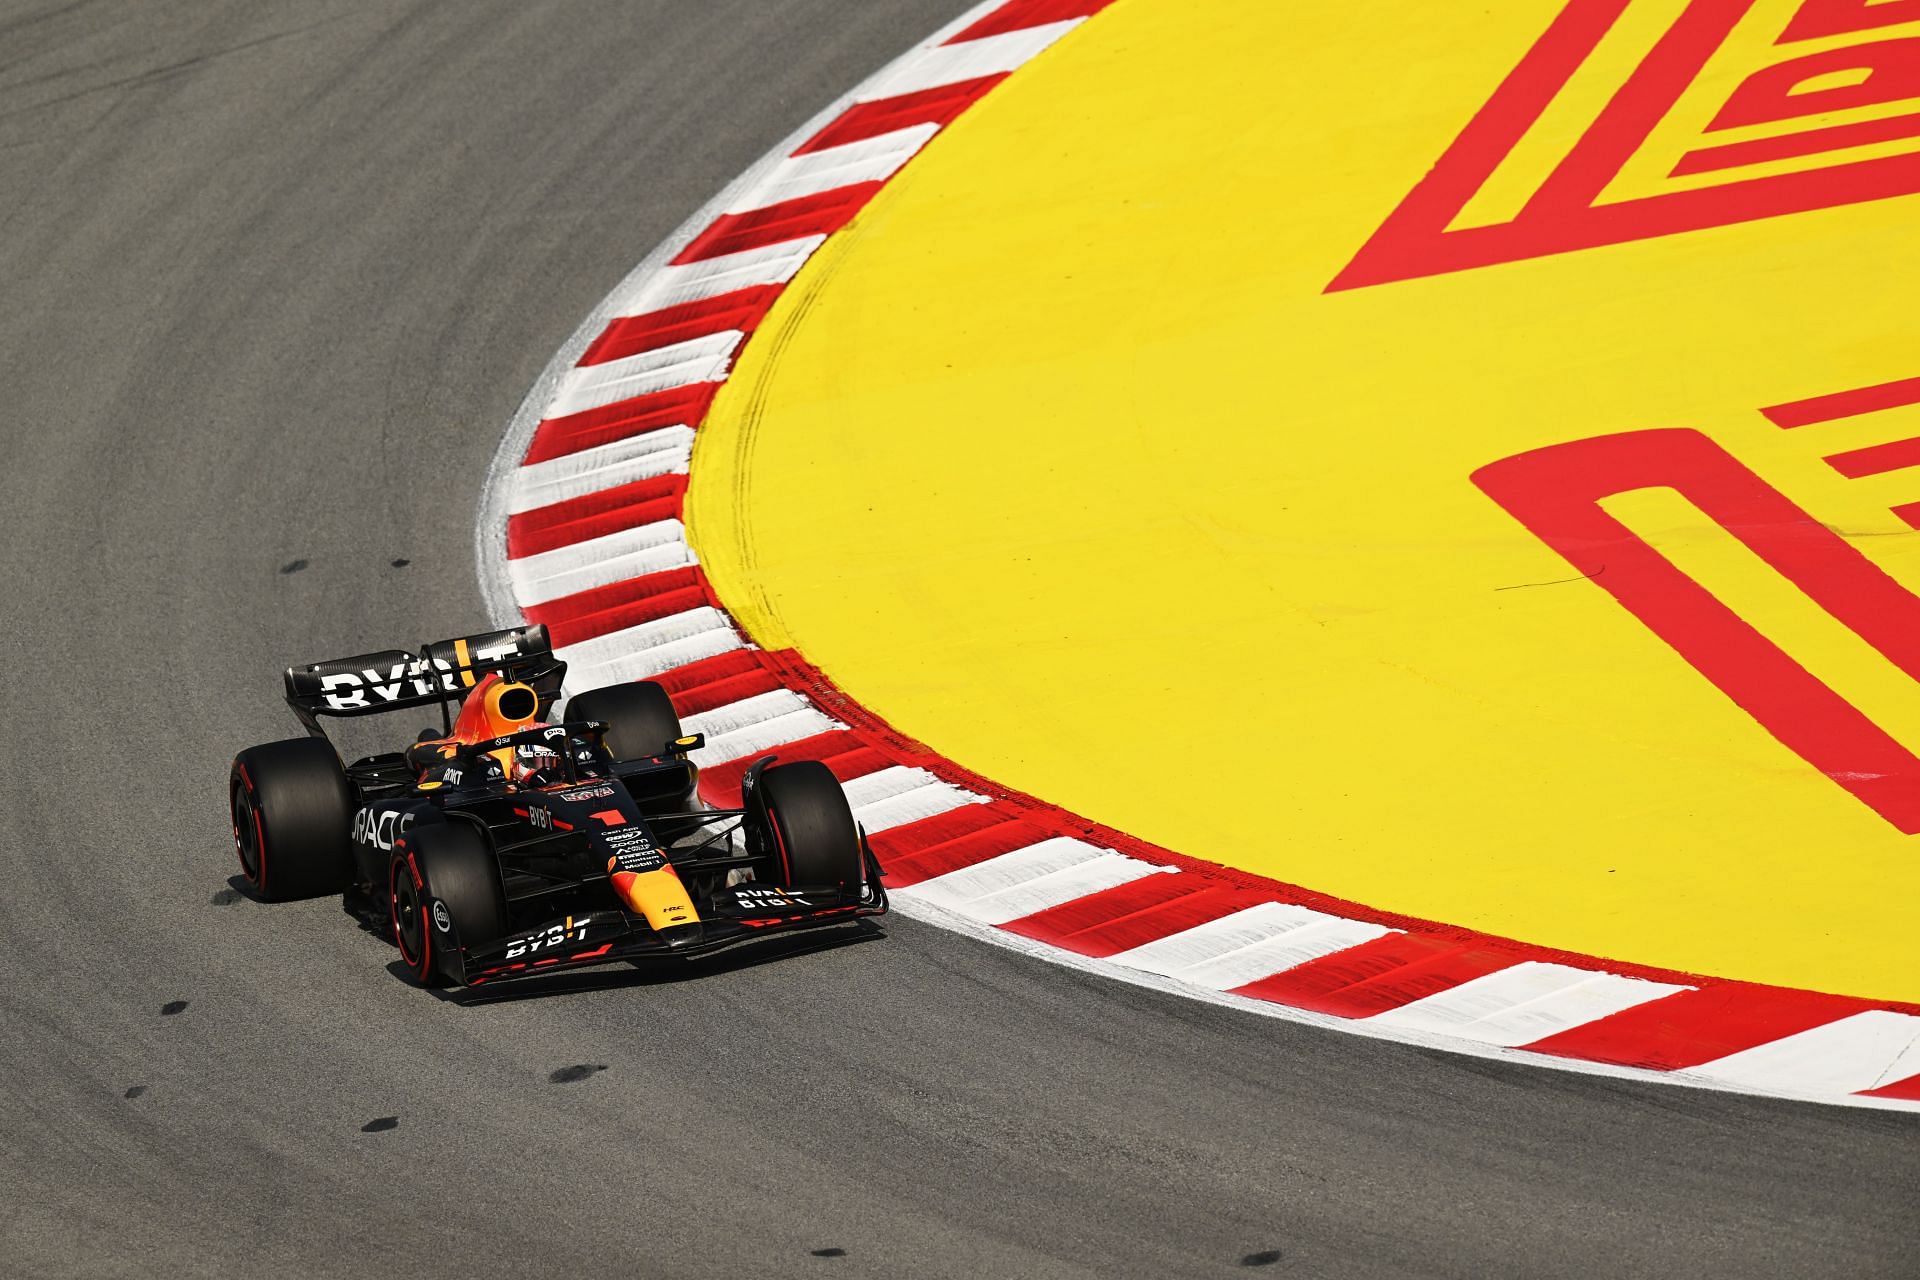 Max Verstappen could possibly top the qualifying session in Spain (Photo by David Ramos/Getty Images)